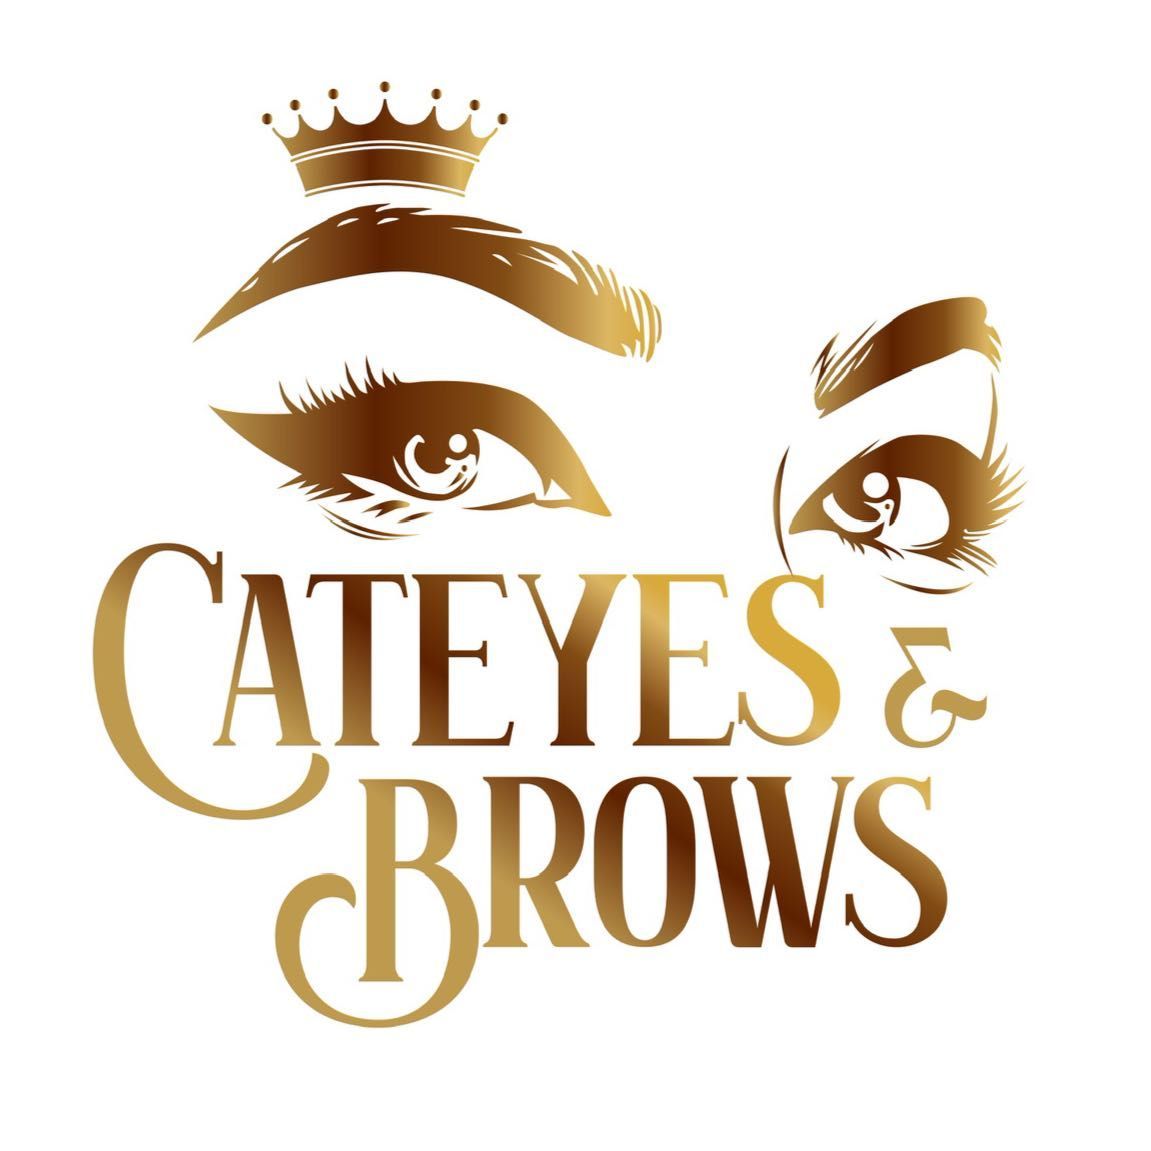 Cateyes And Brows LLC, 16634 Crescent Ave, Tinley Park, 60477